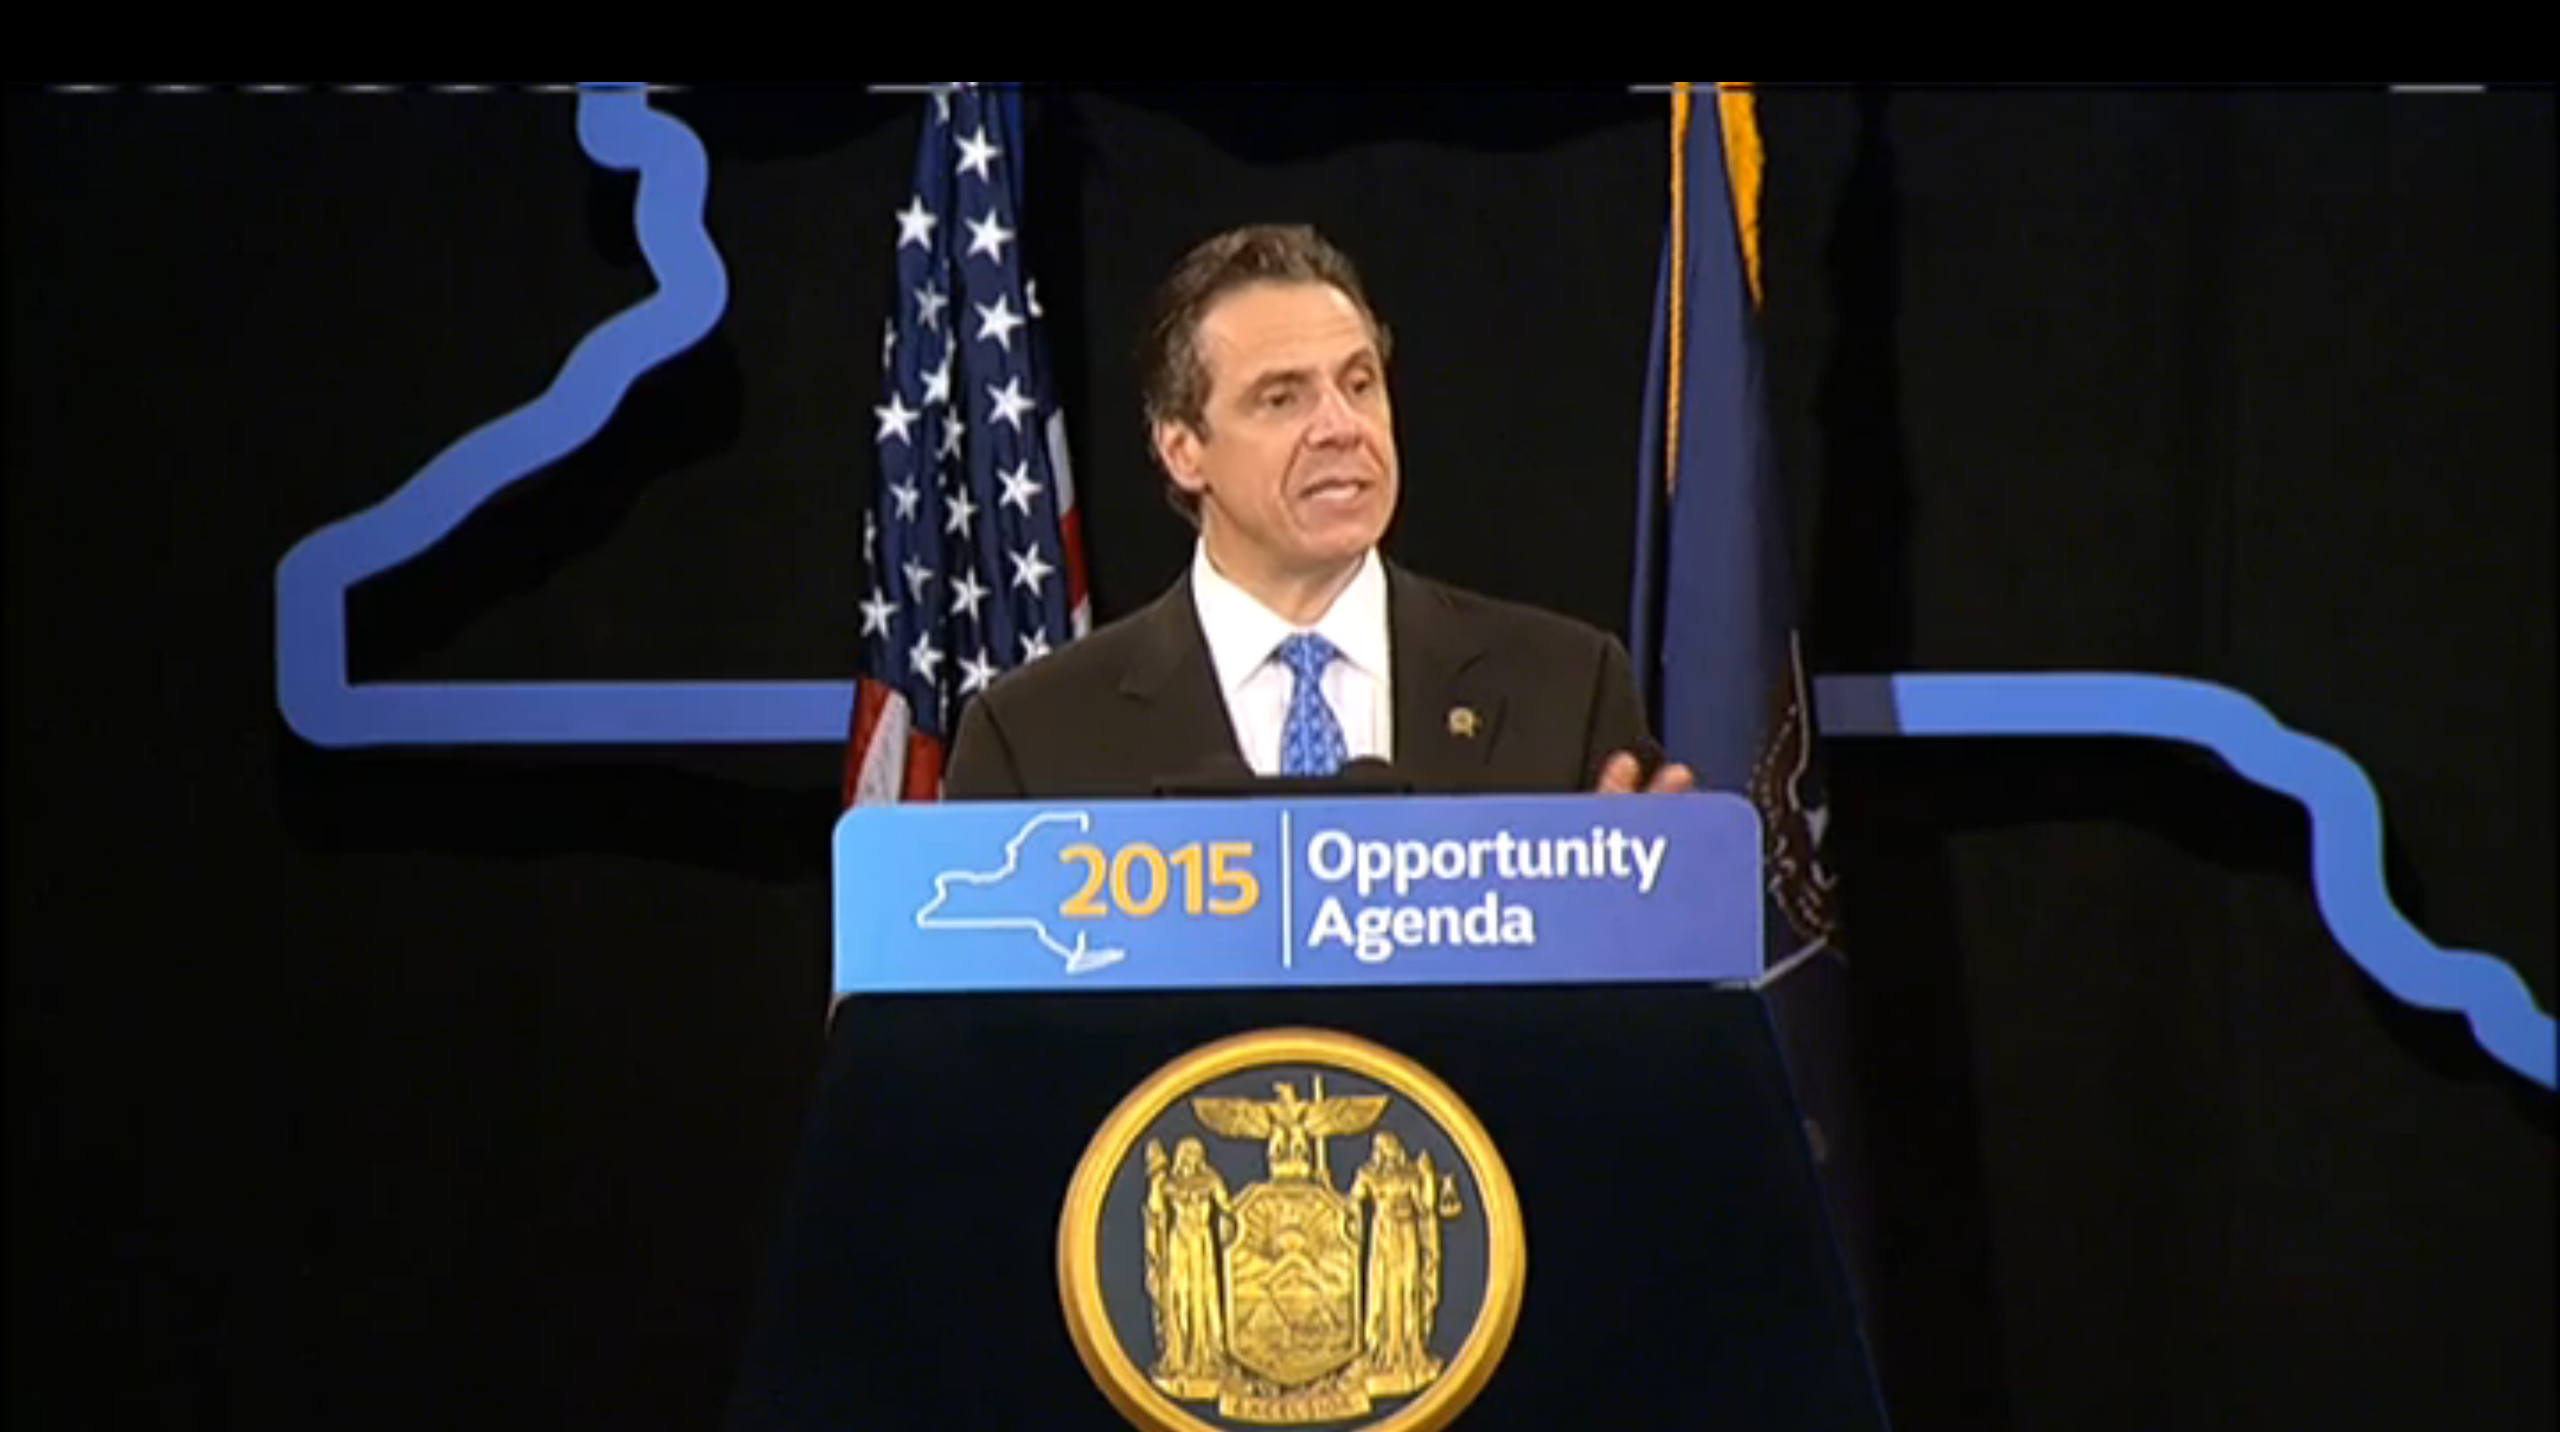 Gov. Andrew Cuomo during his speech today. (Screenshot: Governor's Office)